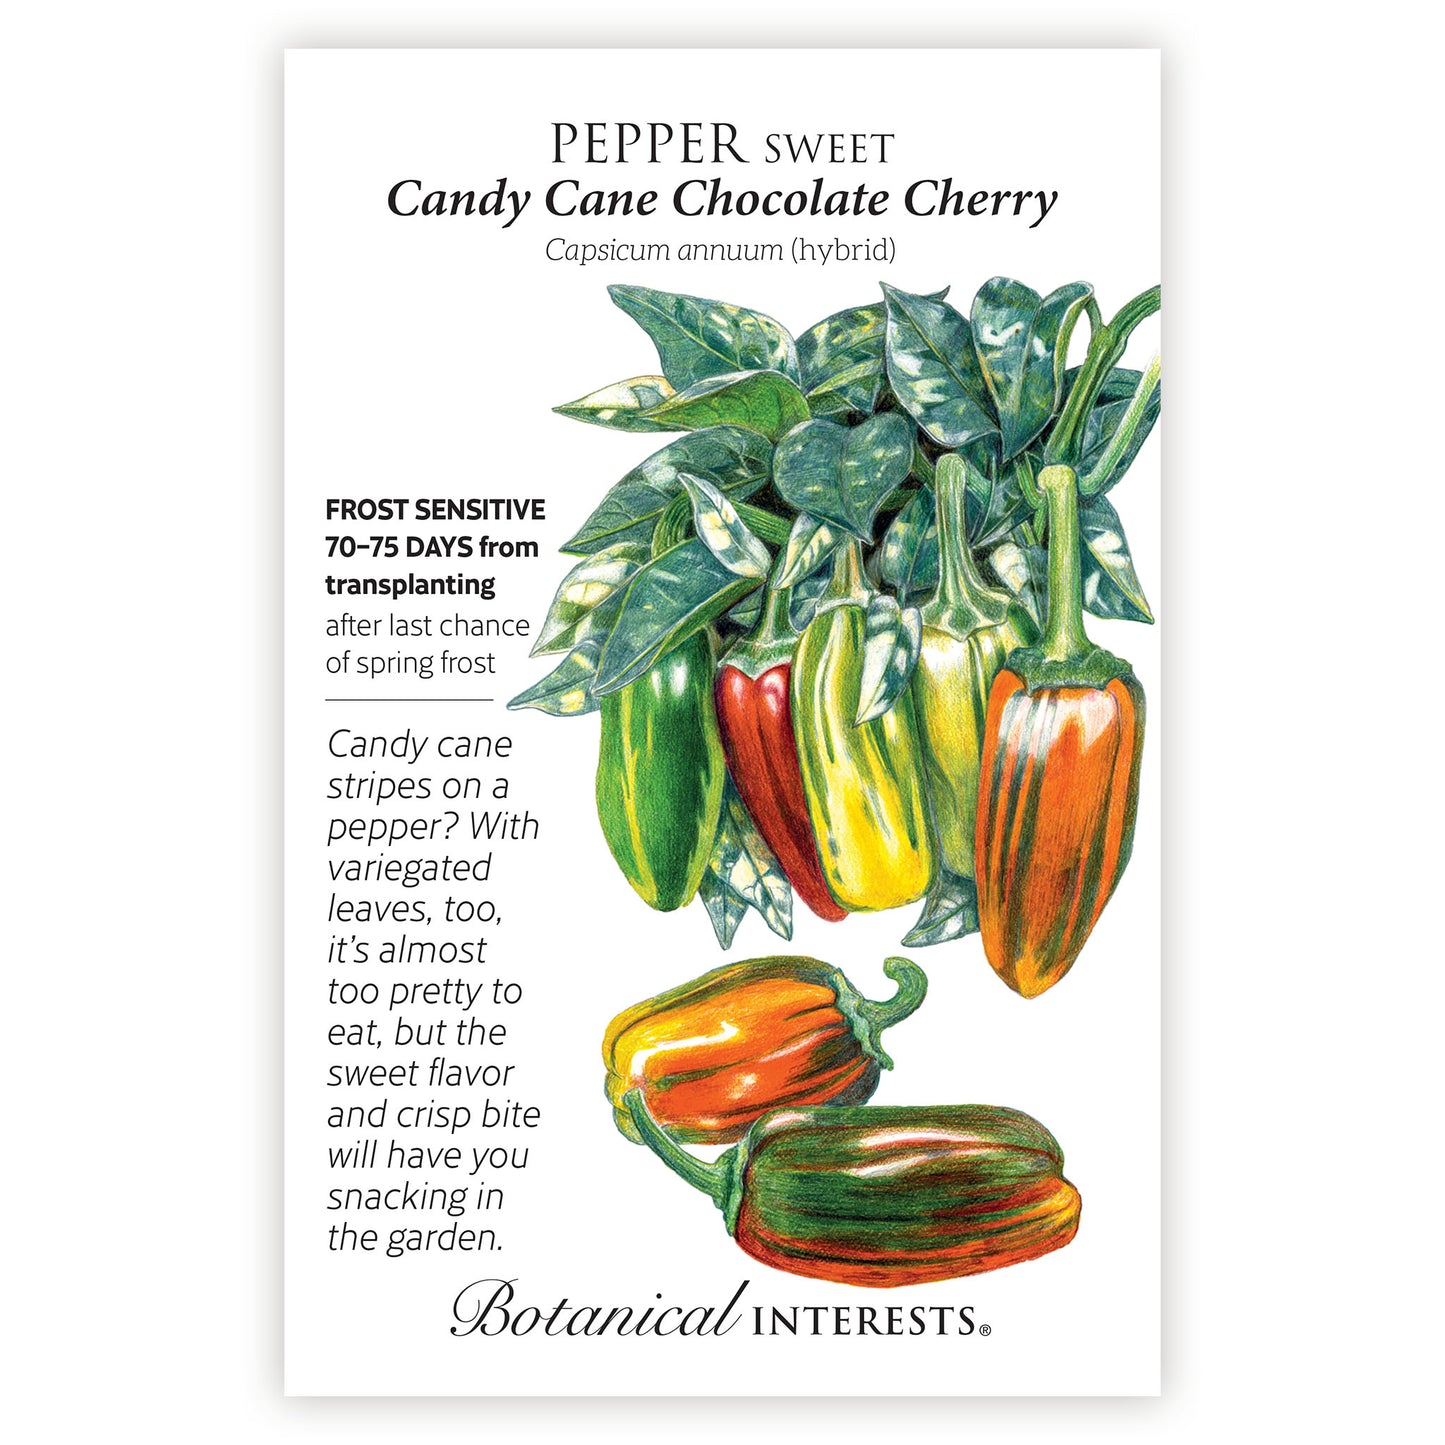 Candy Cane Chocolate Cherry Sweet Pepper Seeds